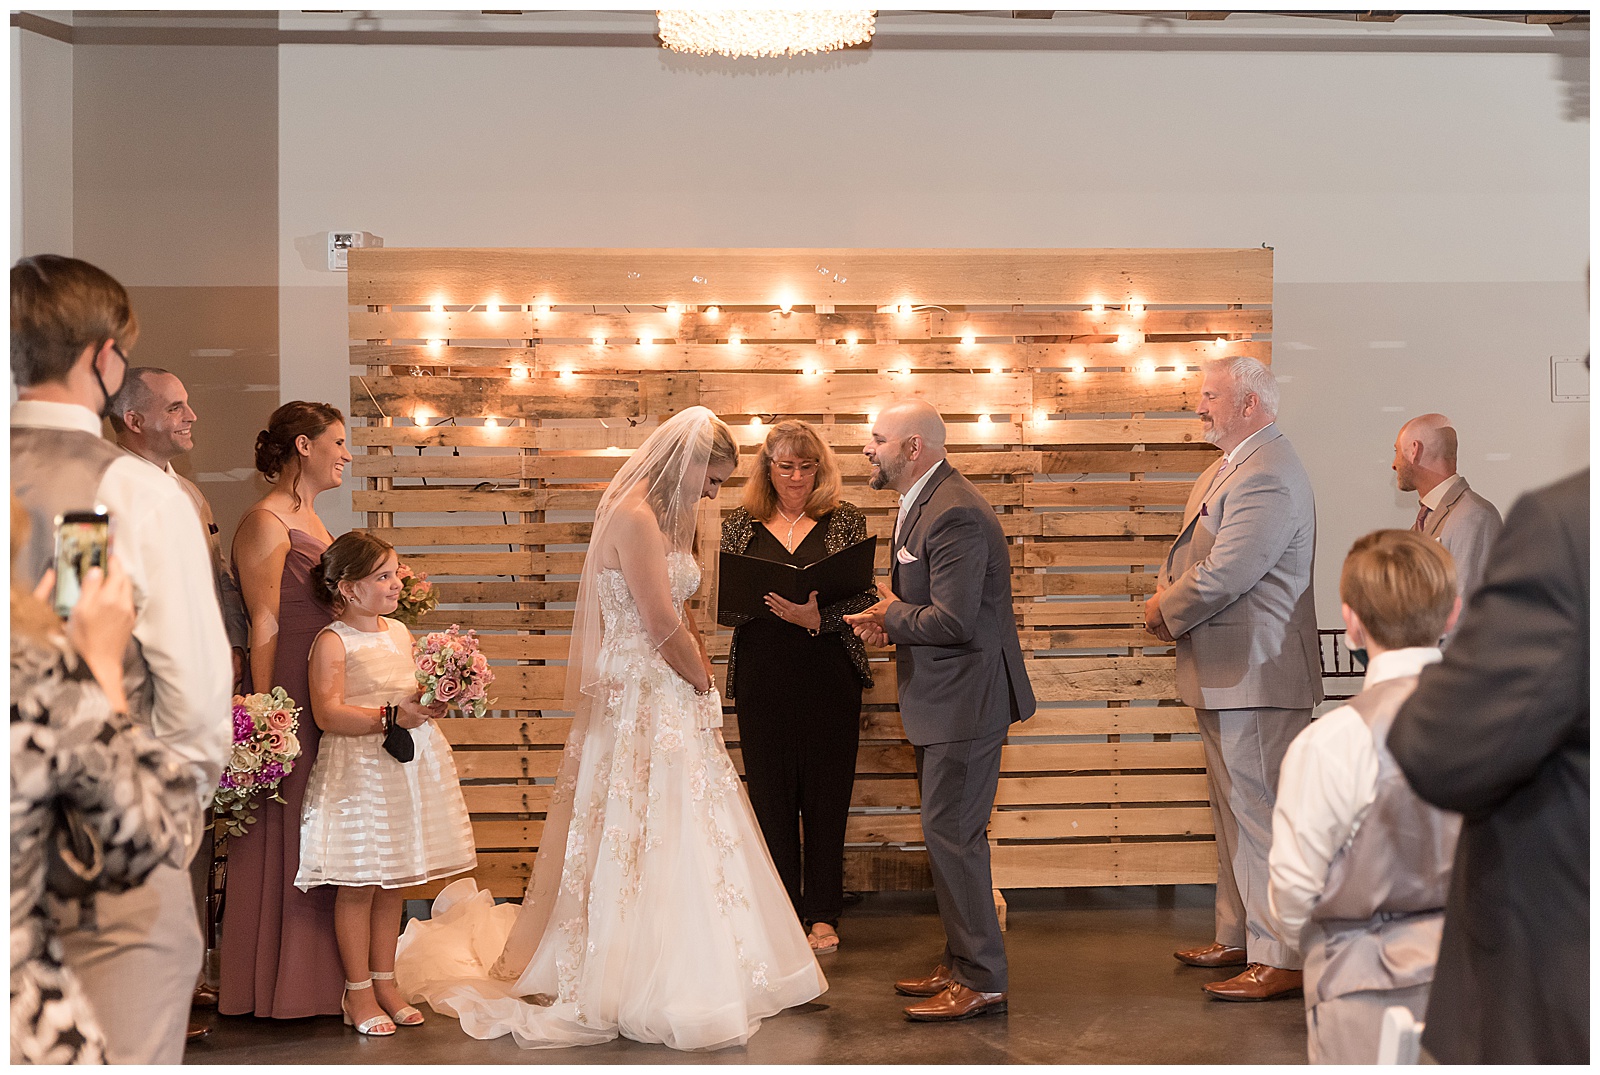 couple standing with bridal party and officiant during wedding ceremony by wooden wall with twinkling lights